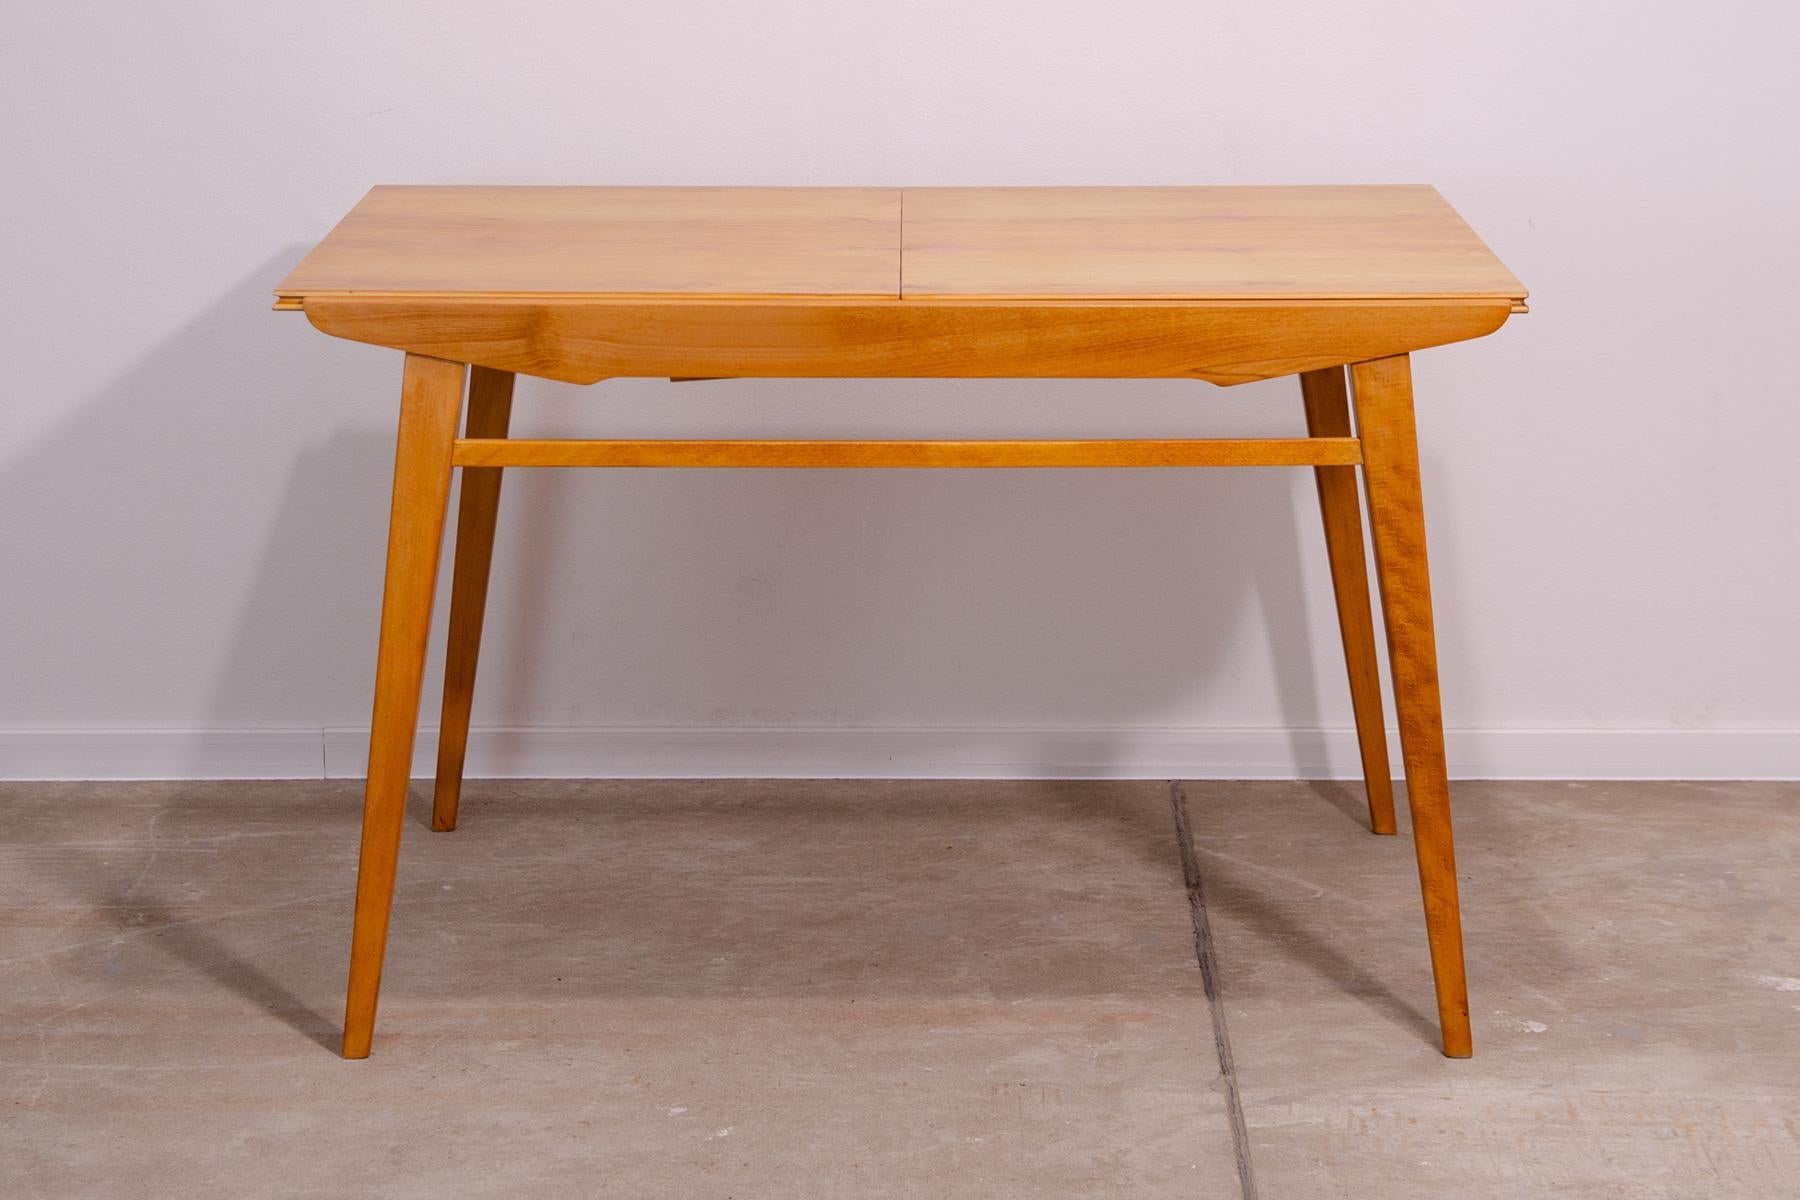 This midcentury adjustable dining table was designed by František Jirák and made by Tatra nábytok company in the former Czechoslovakia in the 1960´s.  It´s made of ash wood.  The lenght is adjustable from 120 cm to 167 cm. The table is in excellent